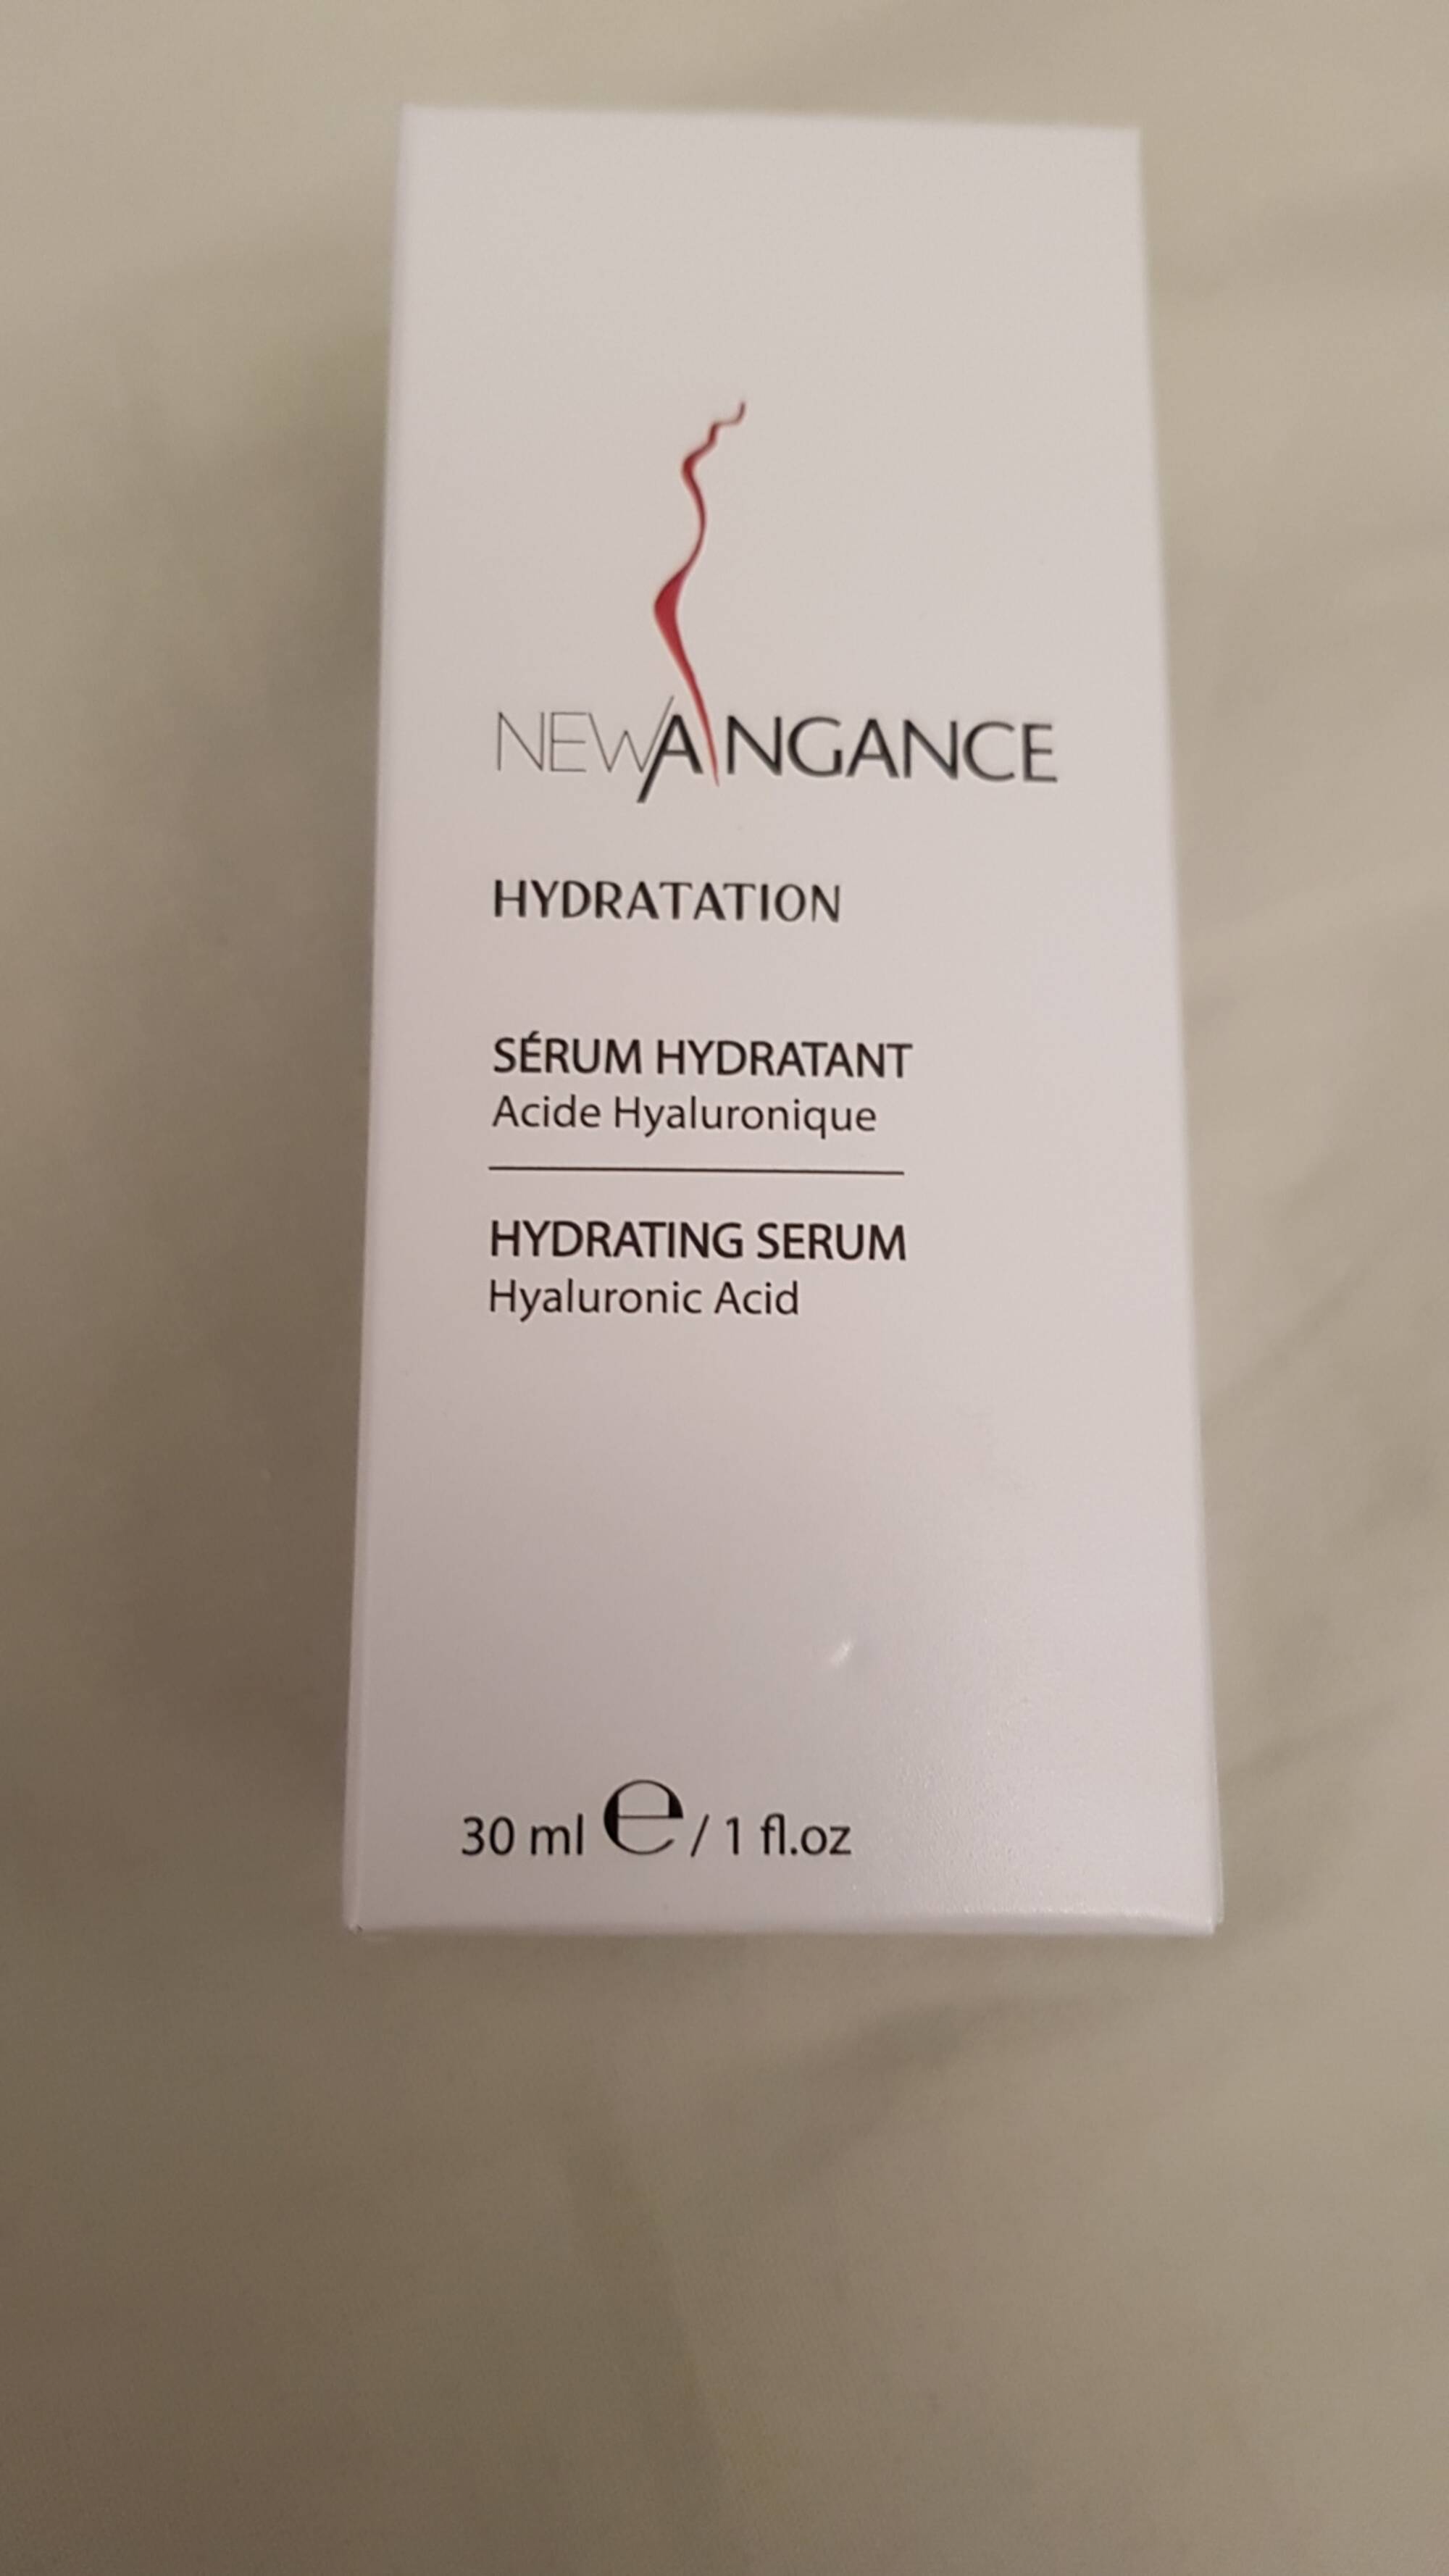 NEW ANGANCE - SERUM HYDRATANT - acide hyaluronique